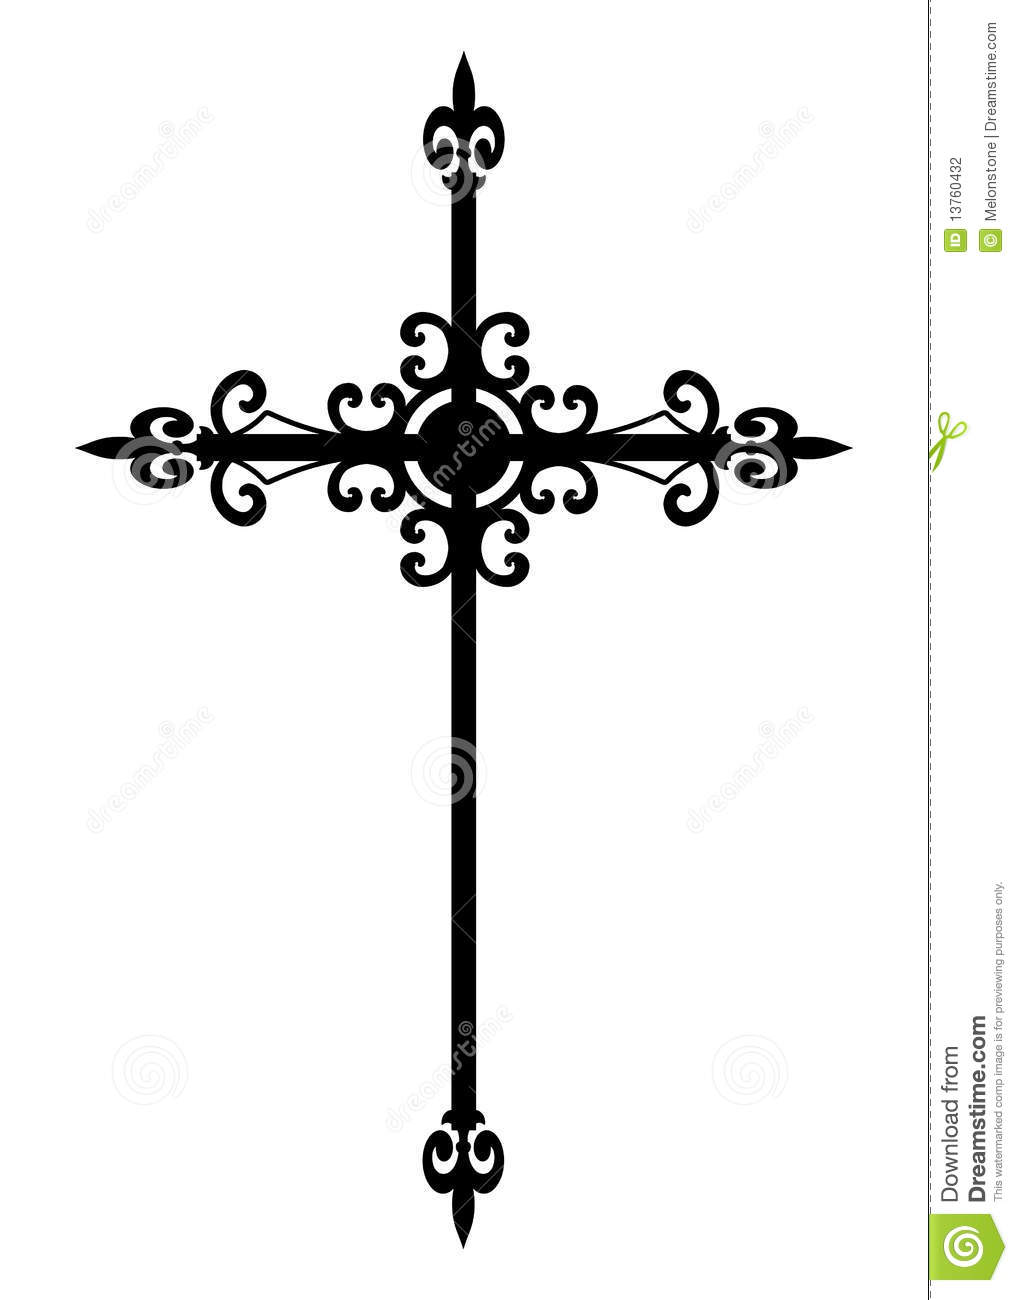 Religious Ornate Metal Cross In Black Isolated On A White Background